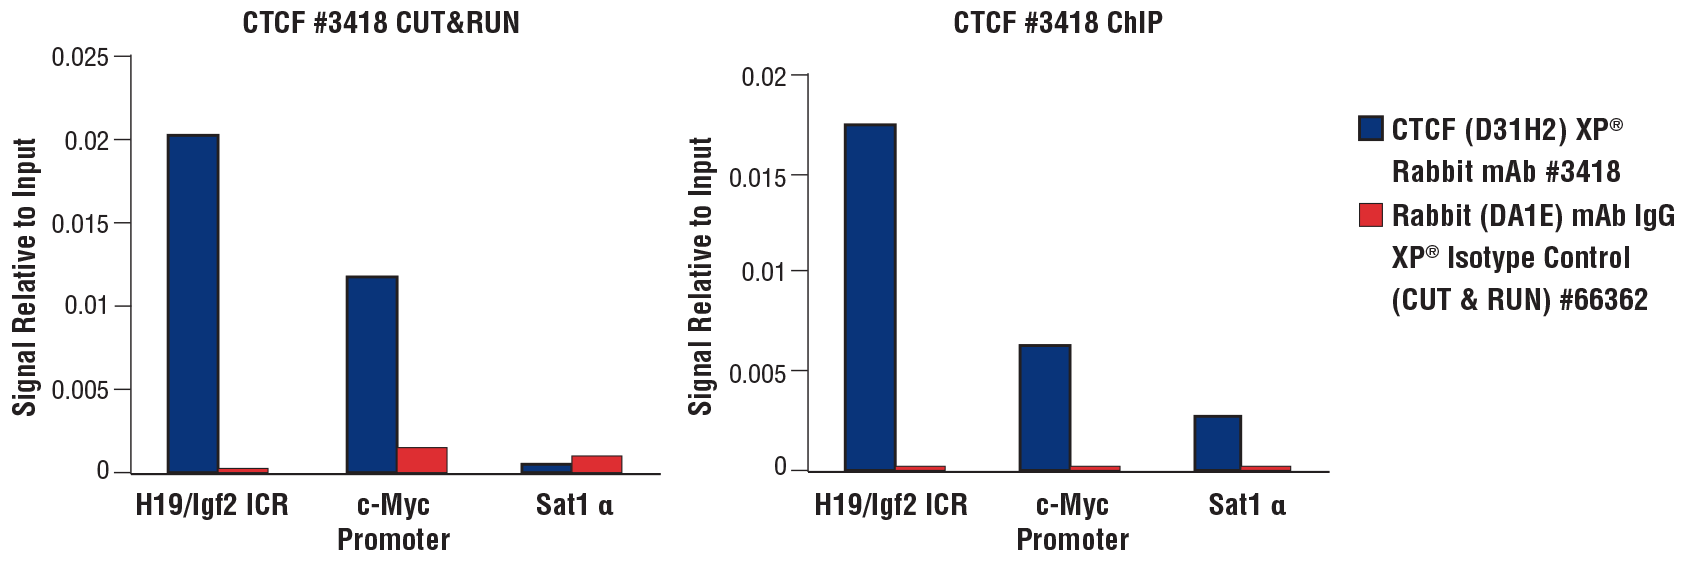 CTCF qPCR results for CUT&RUN and ChIP